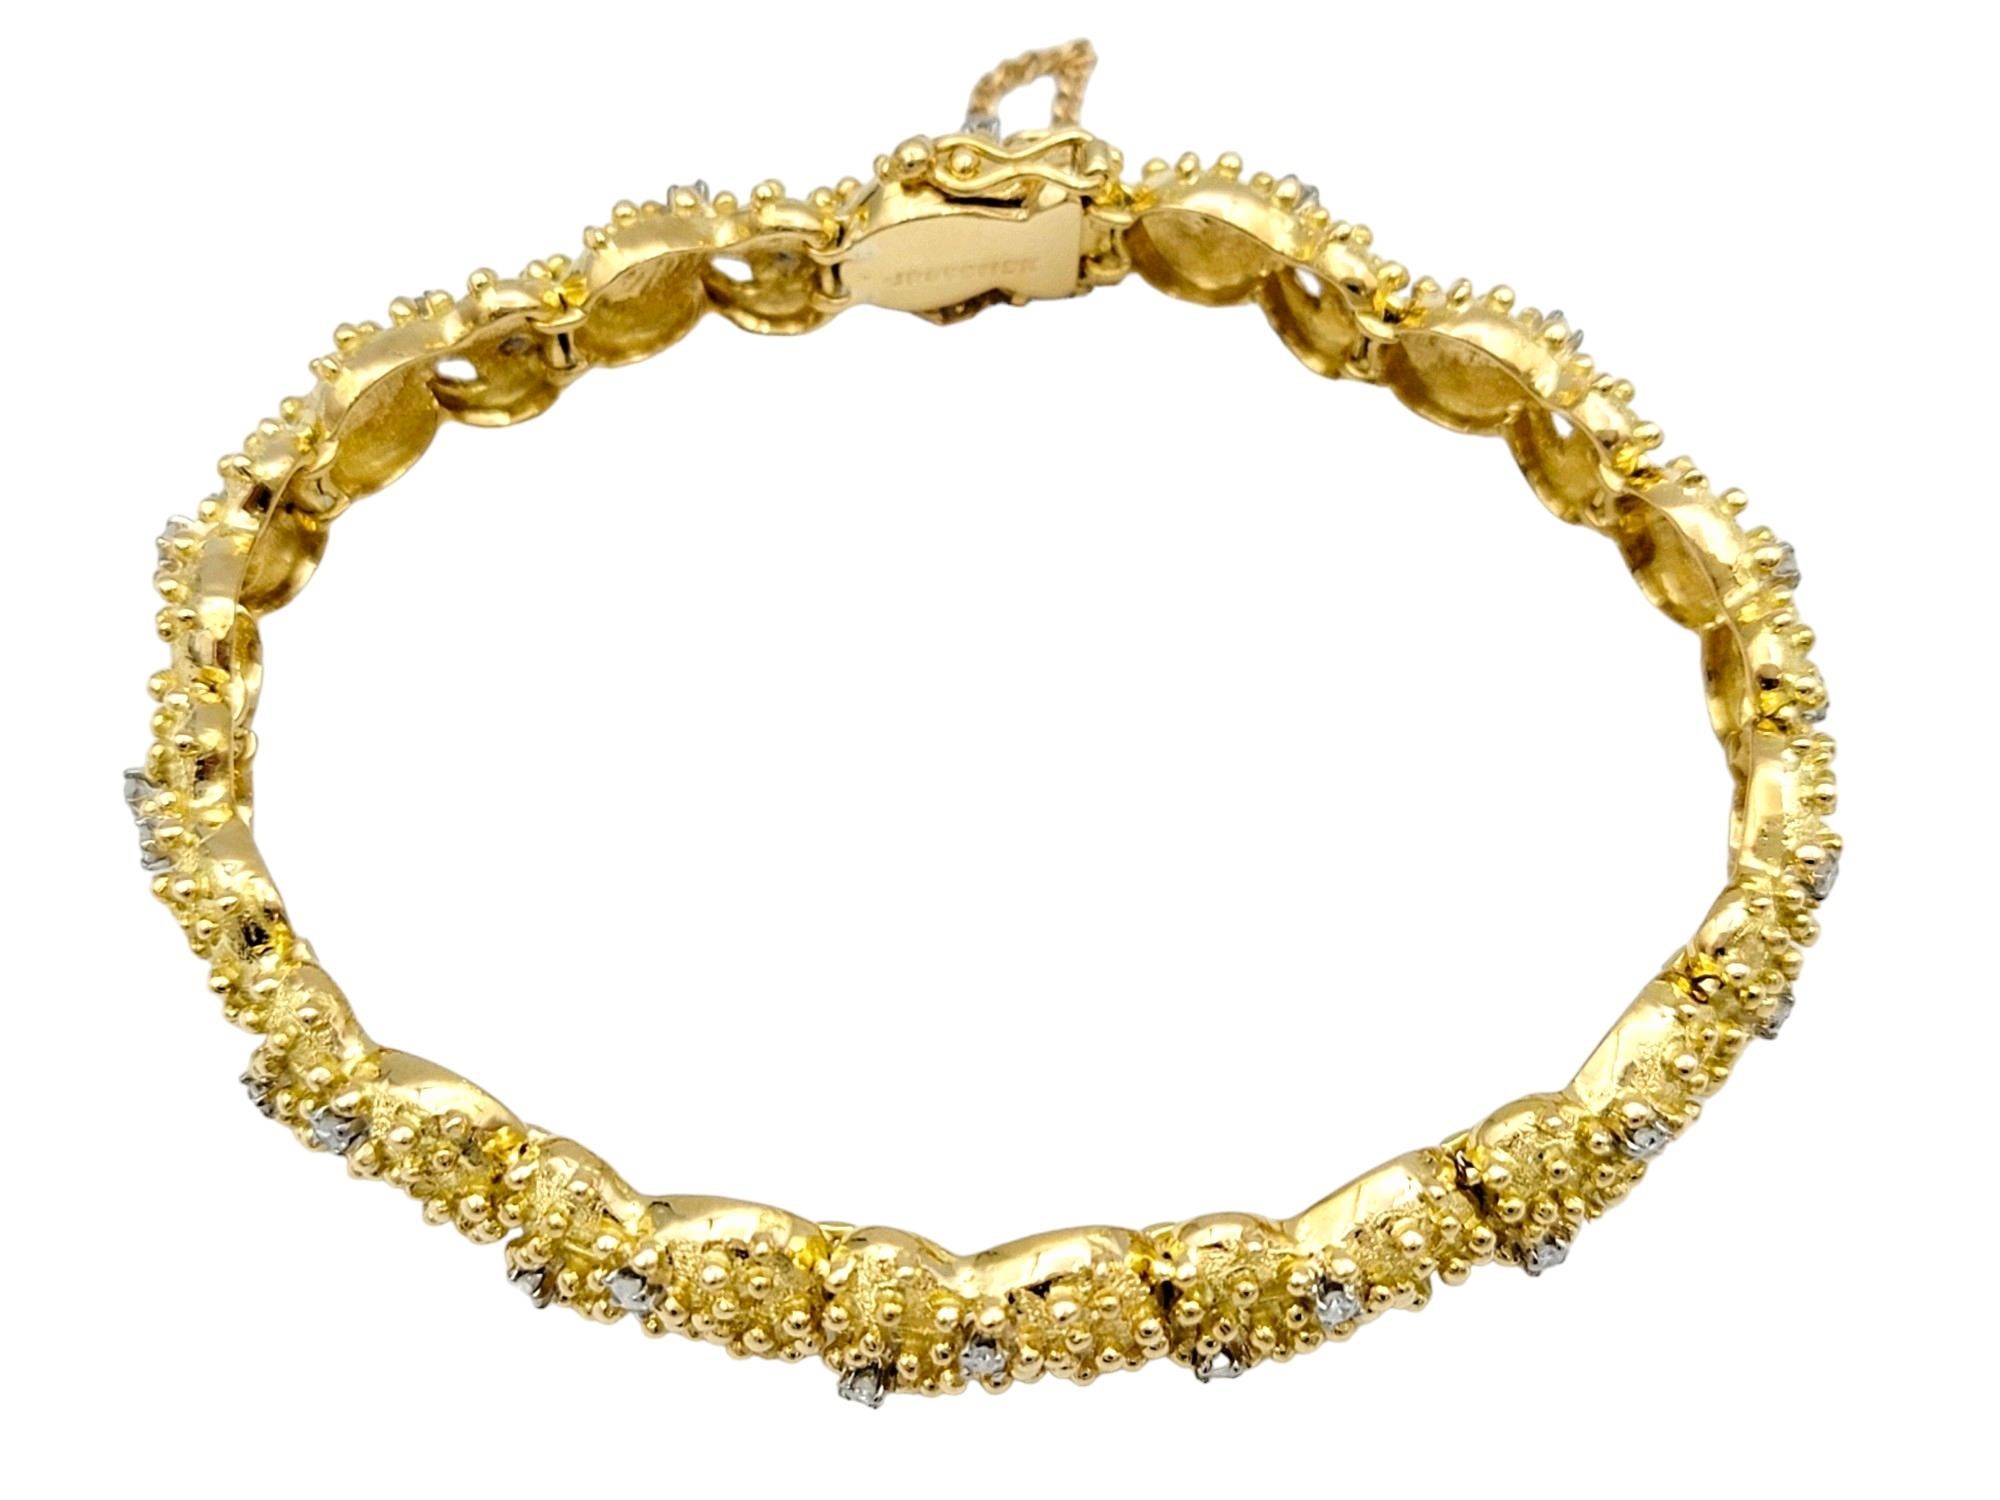 Contemporary J. Rossi Diamond Link Bracelet with Granulated Design in 18 Karat Yellow Gold For Sale